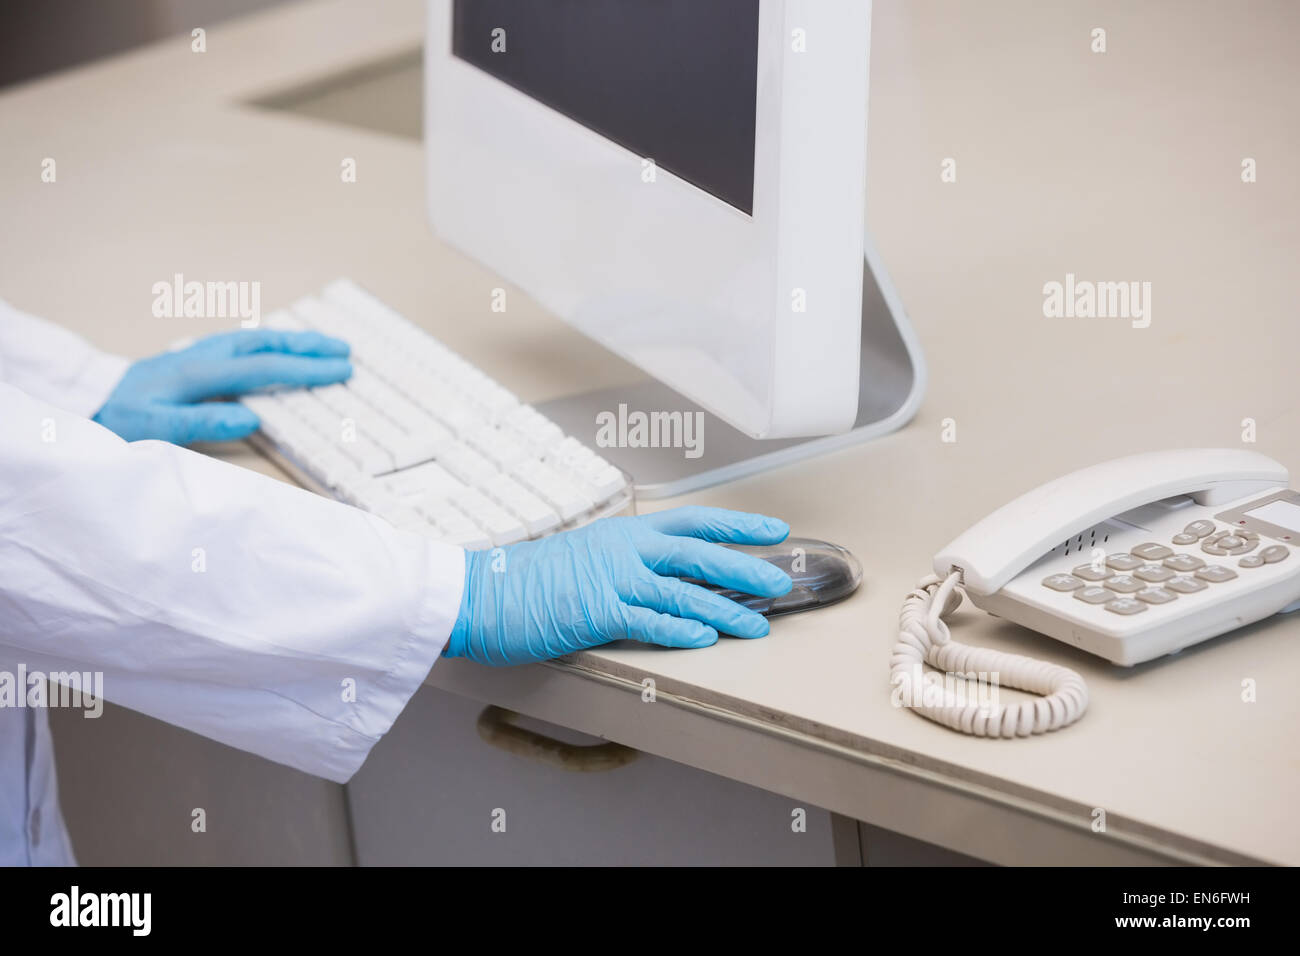 Scientist working with computer Stock Photo